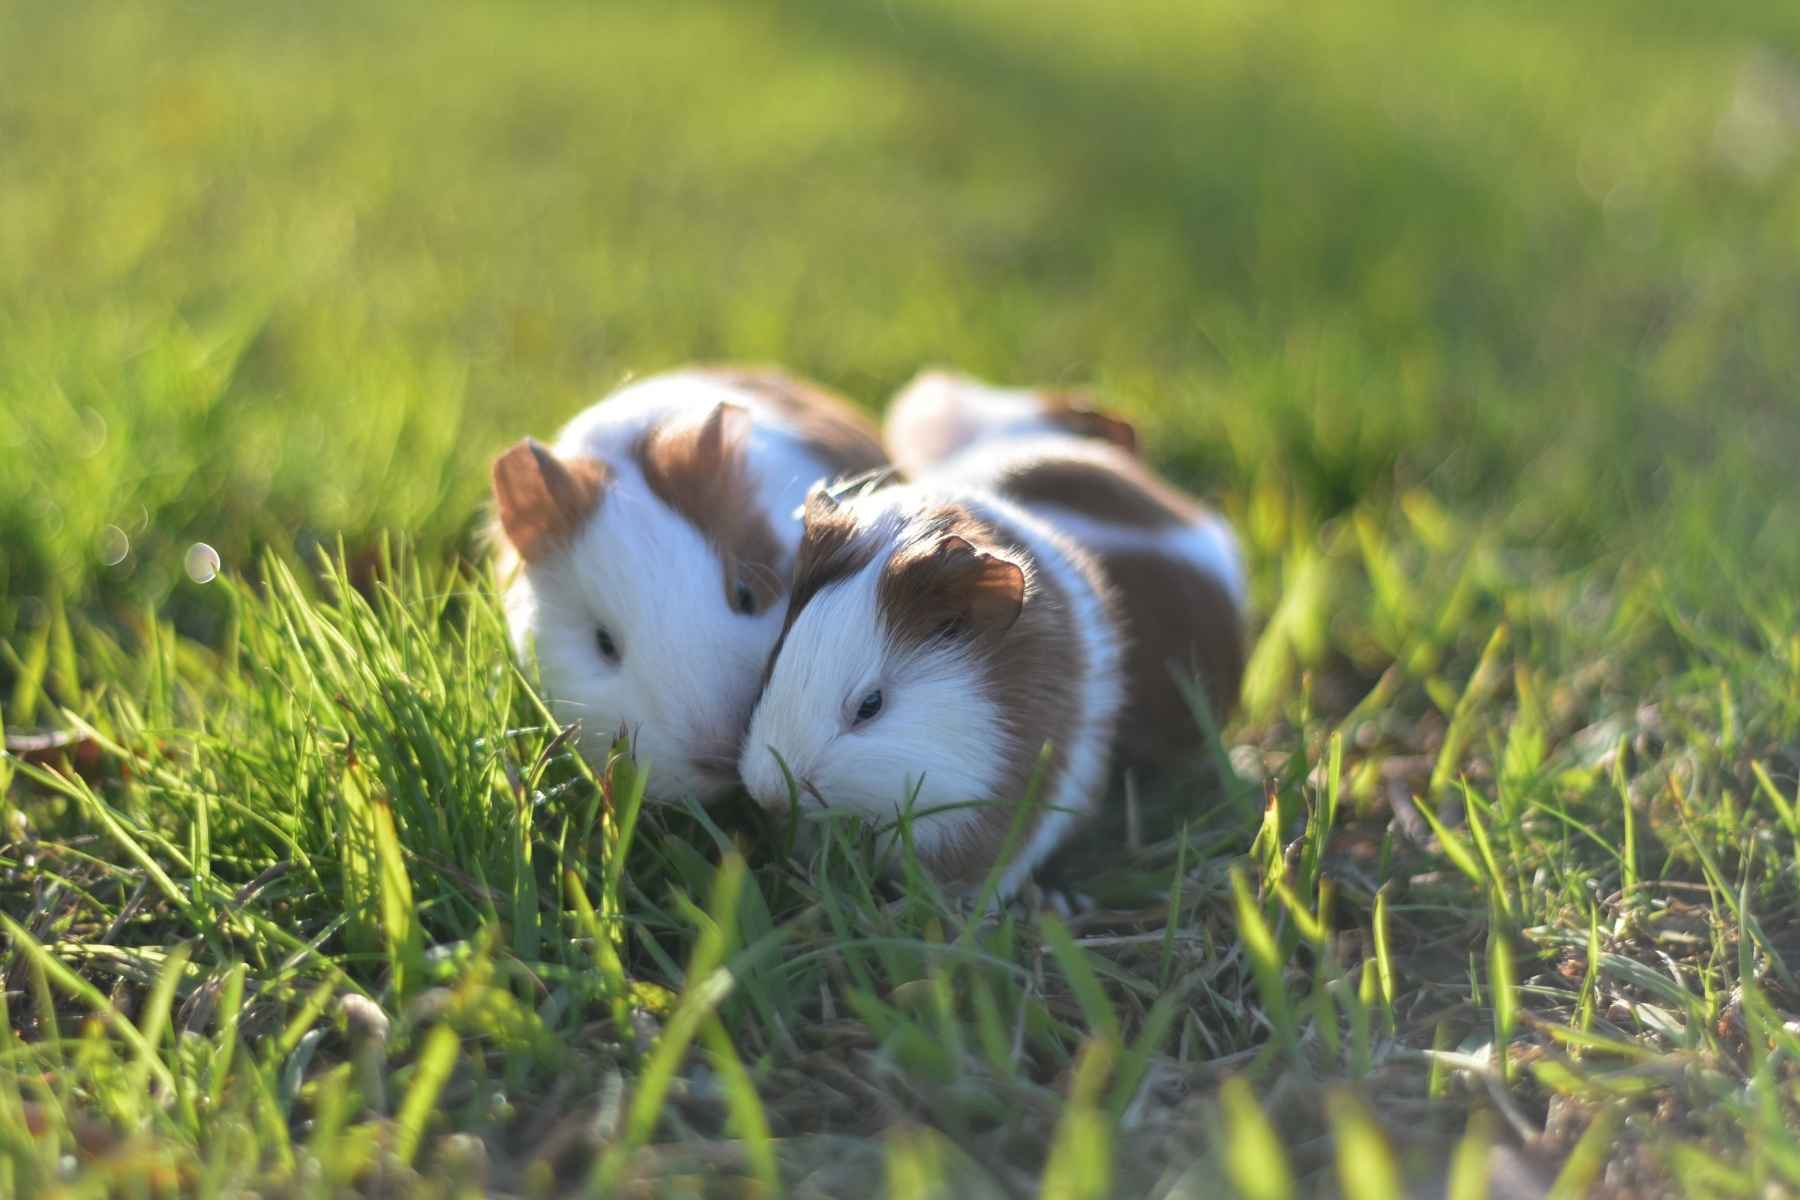 Two hamsters cuddling on the lawn